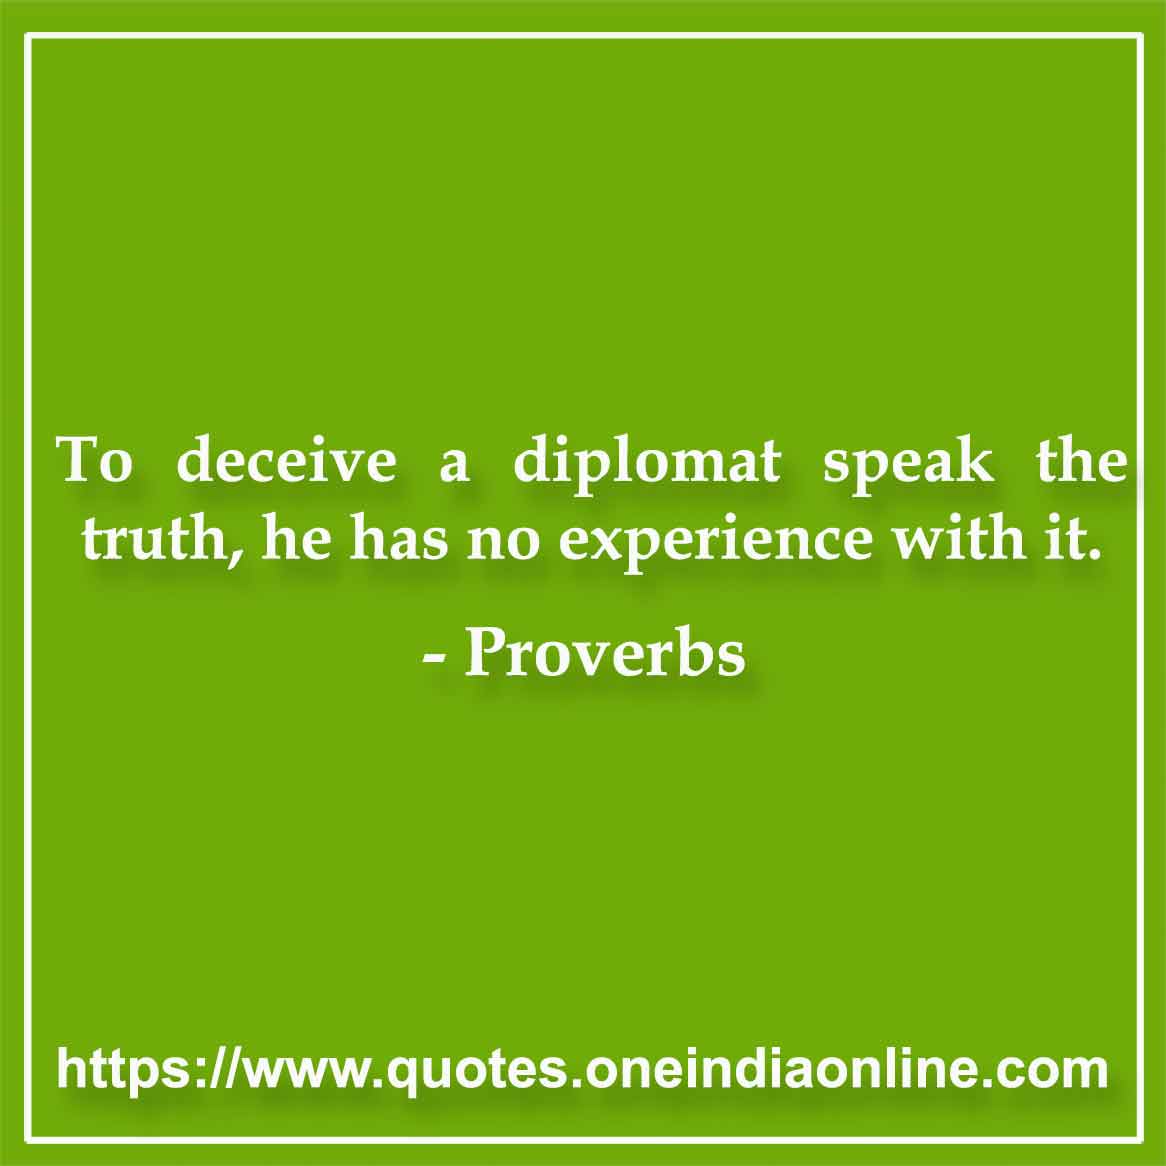 To deceive a diplomat speak the truth, he has no experience with it.

Greek 